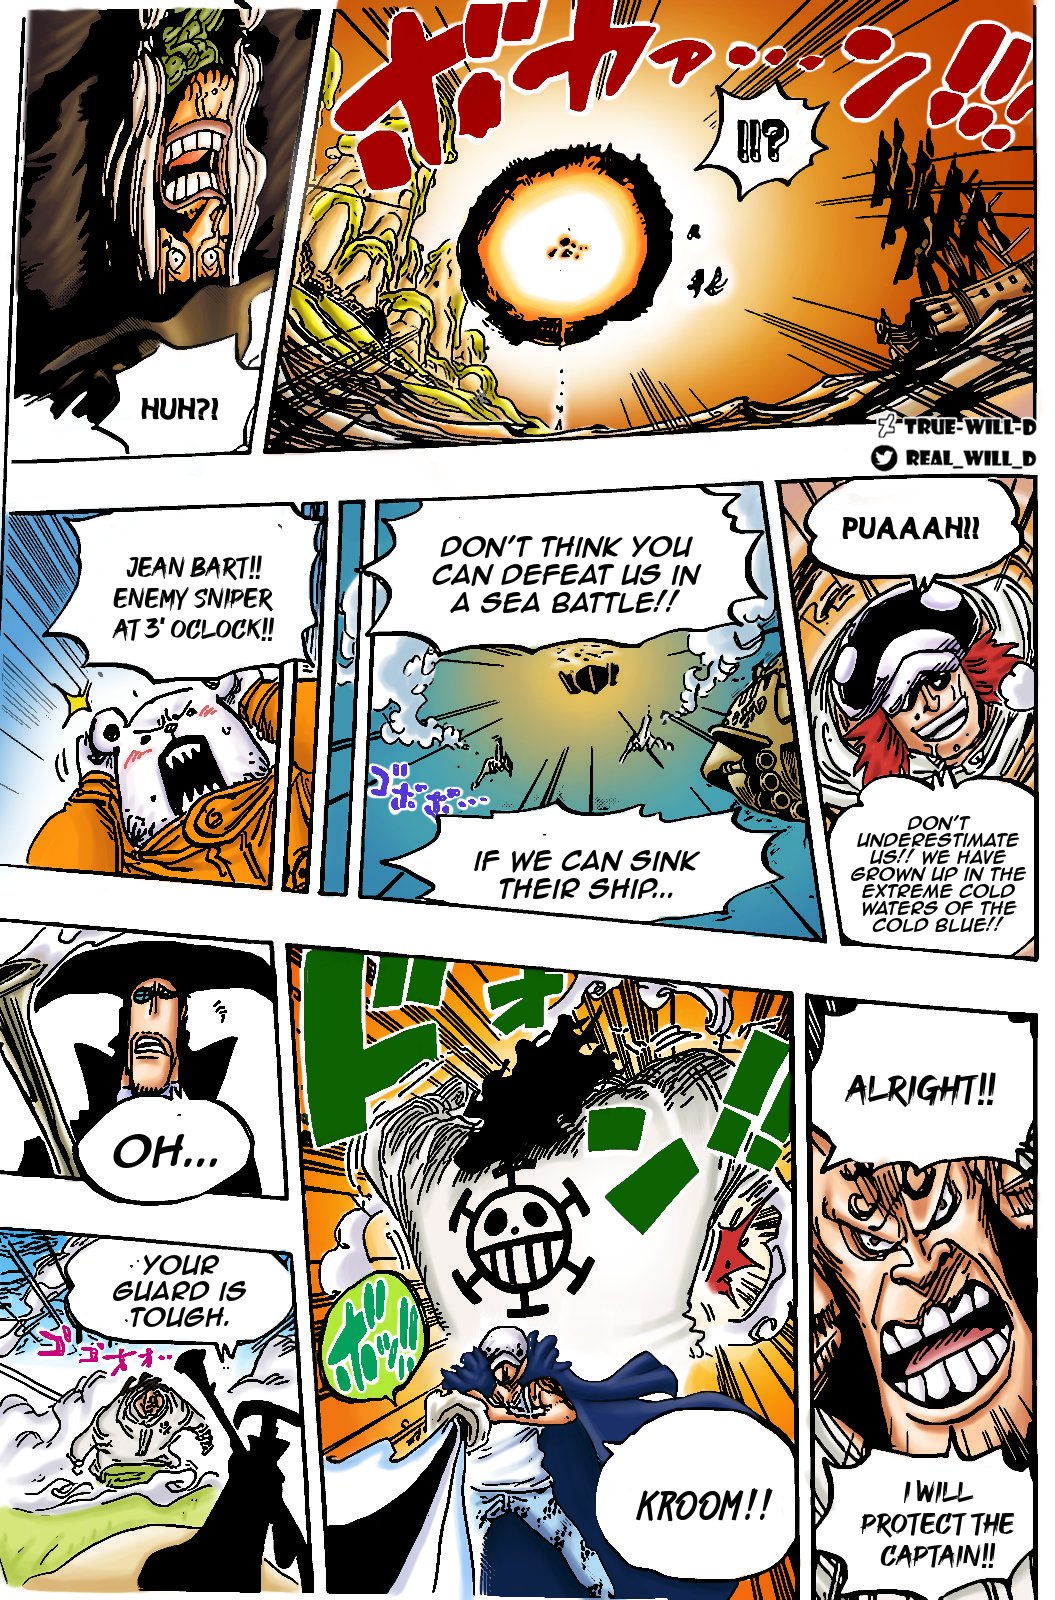 One Piece Chapter 1065 SECRET OF VEGAPUNK'S TECH REVEALED One Piece Chapter 1065, 44% OFF